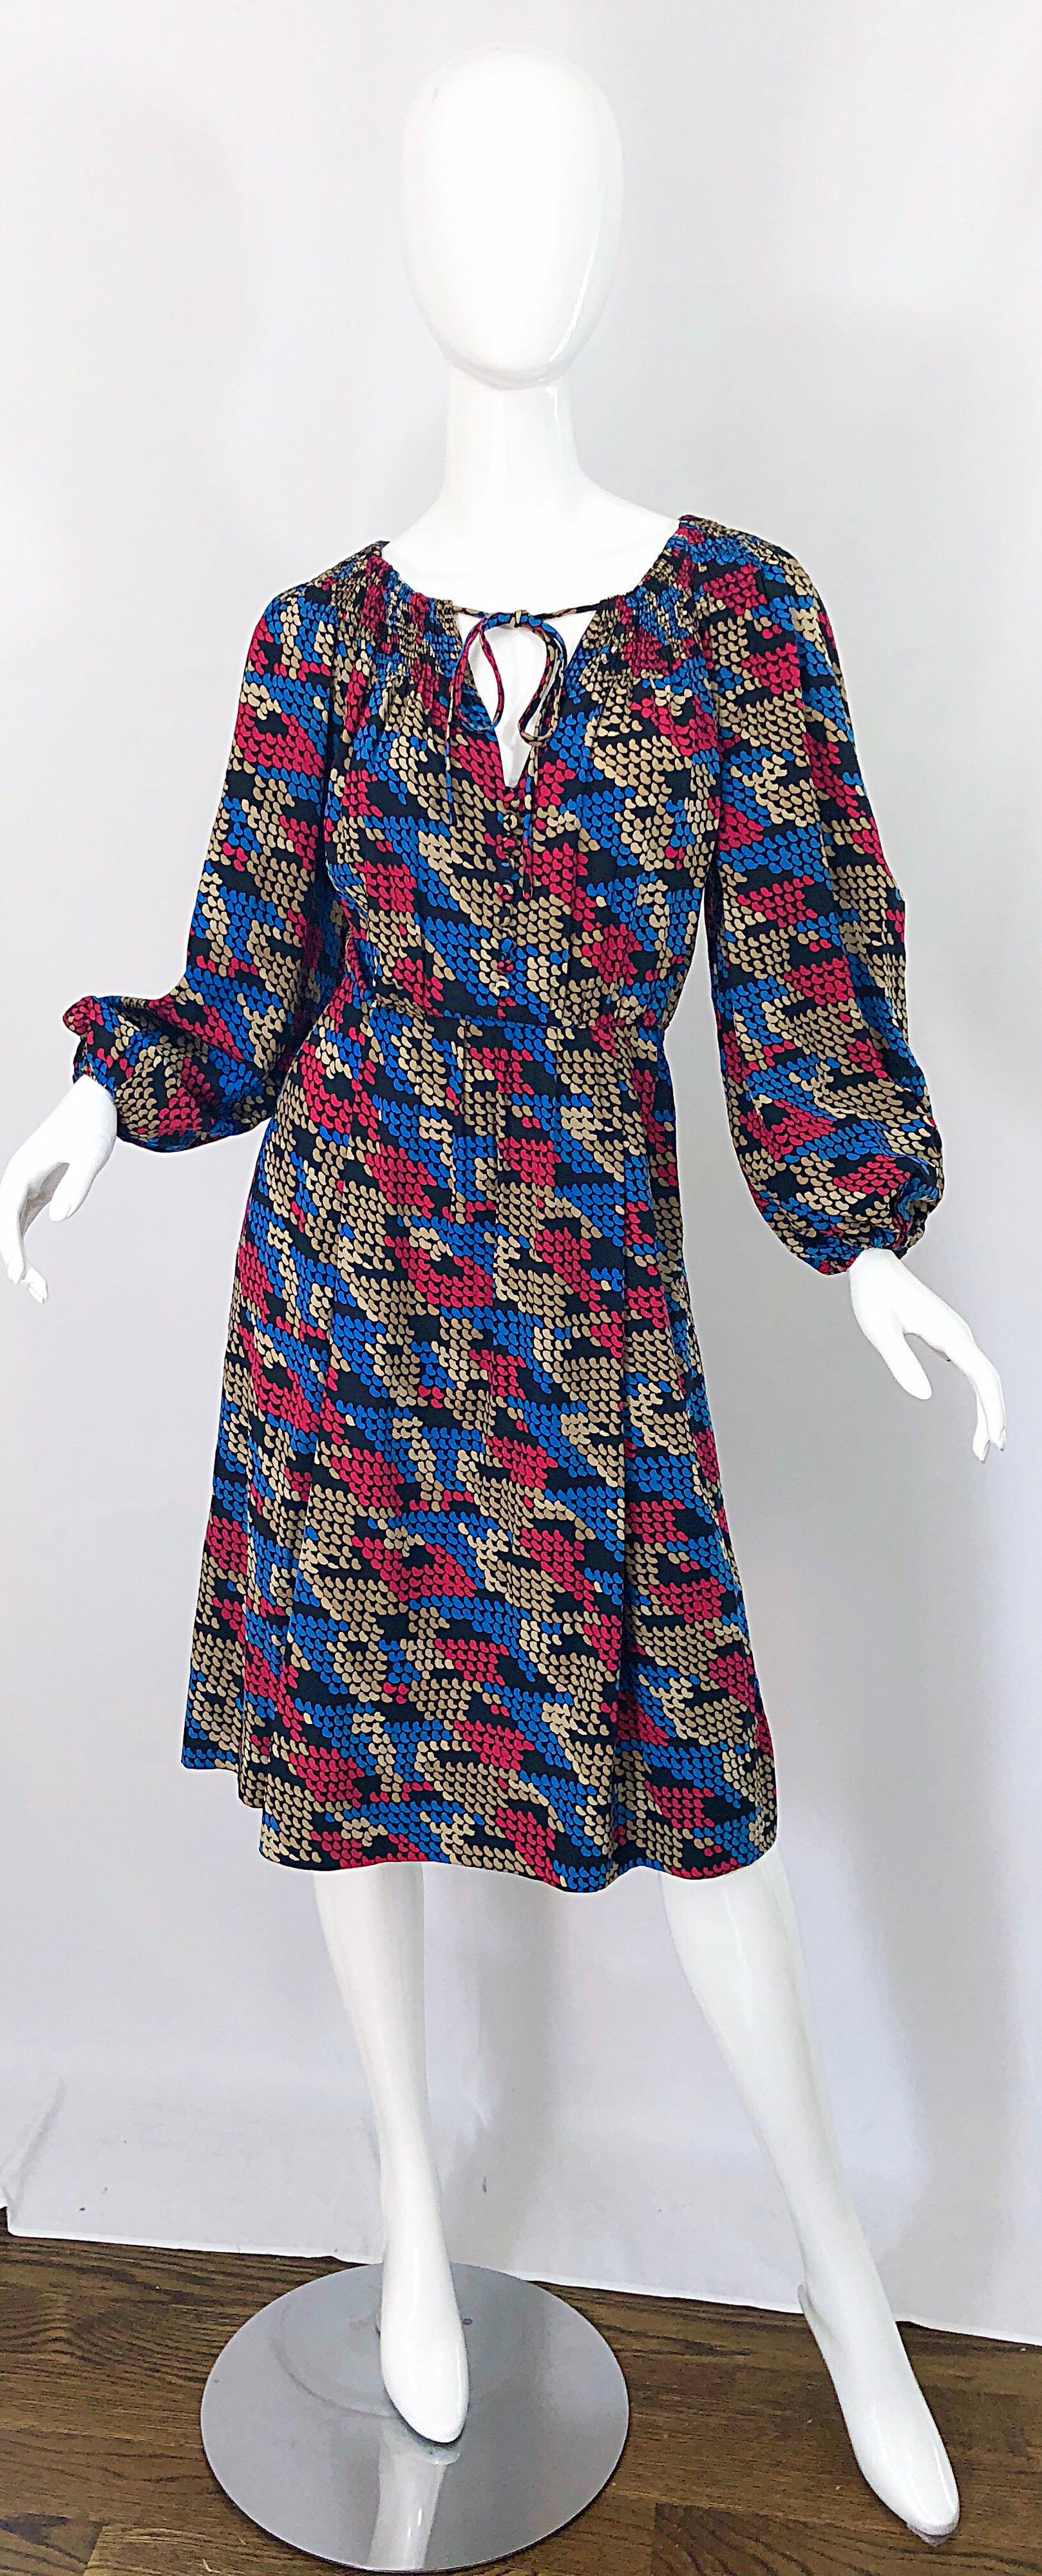 Amazing vintage 70s GIVENCHY HAUTE COUTURE exaggerated houndstooth bishop sleeve silk dress! Features vibrant colors of fuchsia pink, blue, grey and black throughout. Ties at neck can be worn multiple ways. Hidden metal zipper up the side. 
Chic